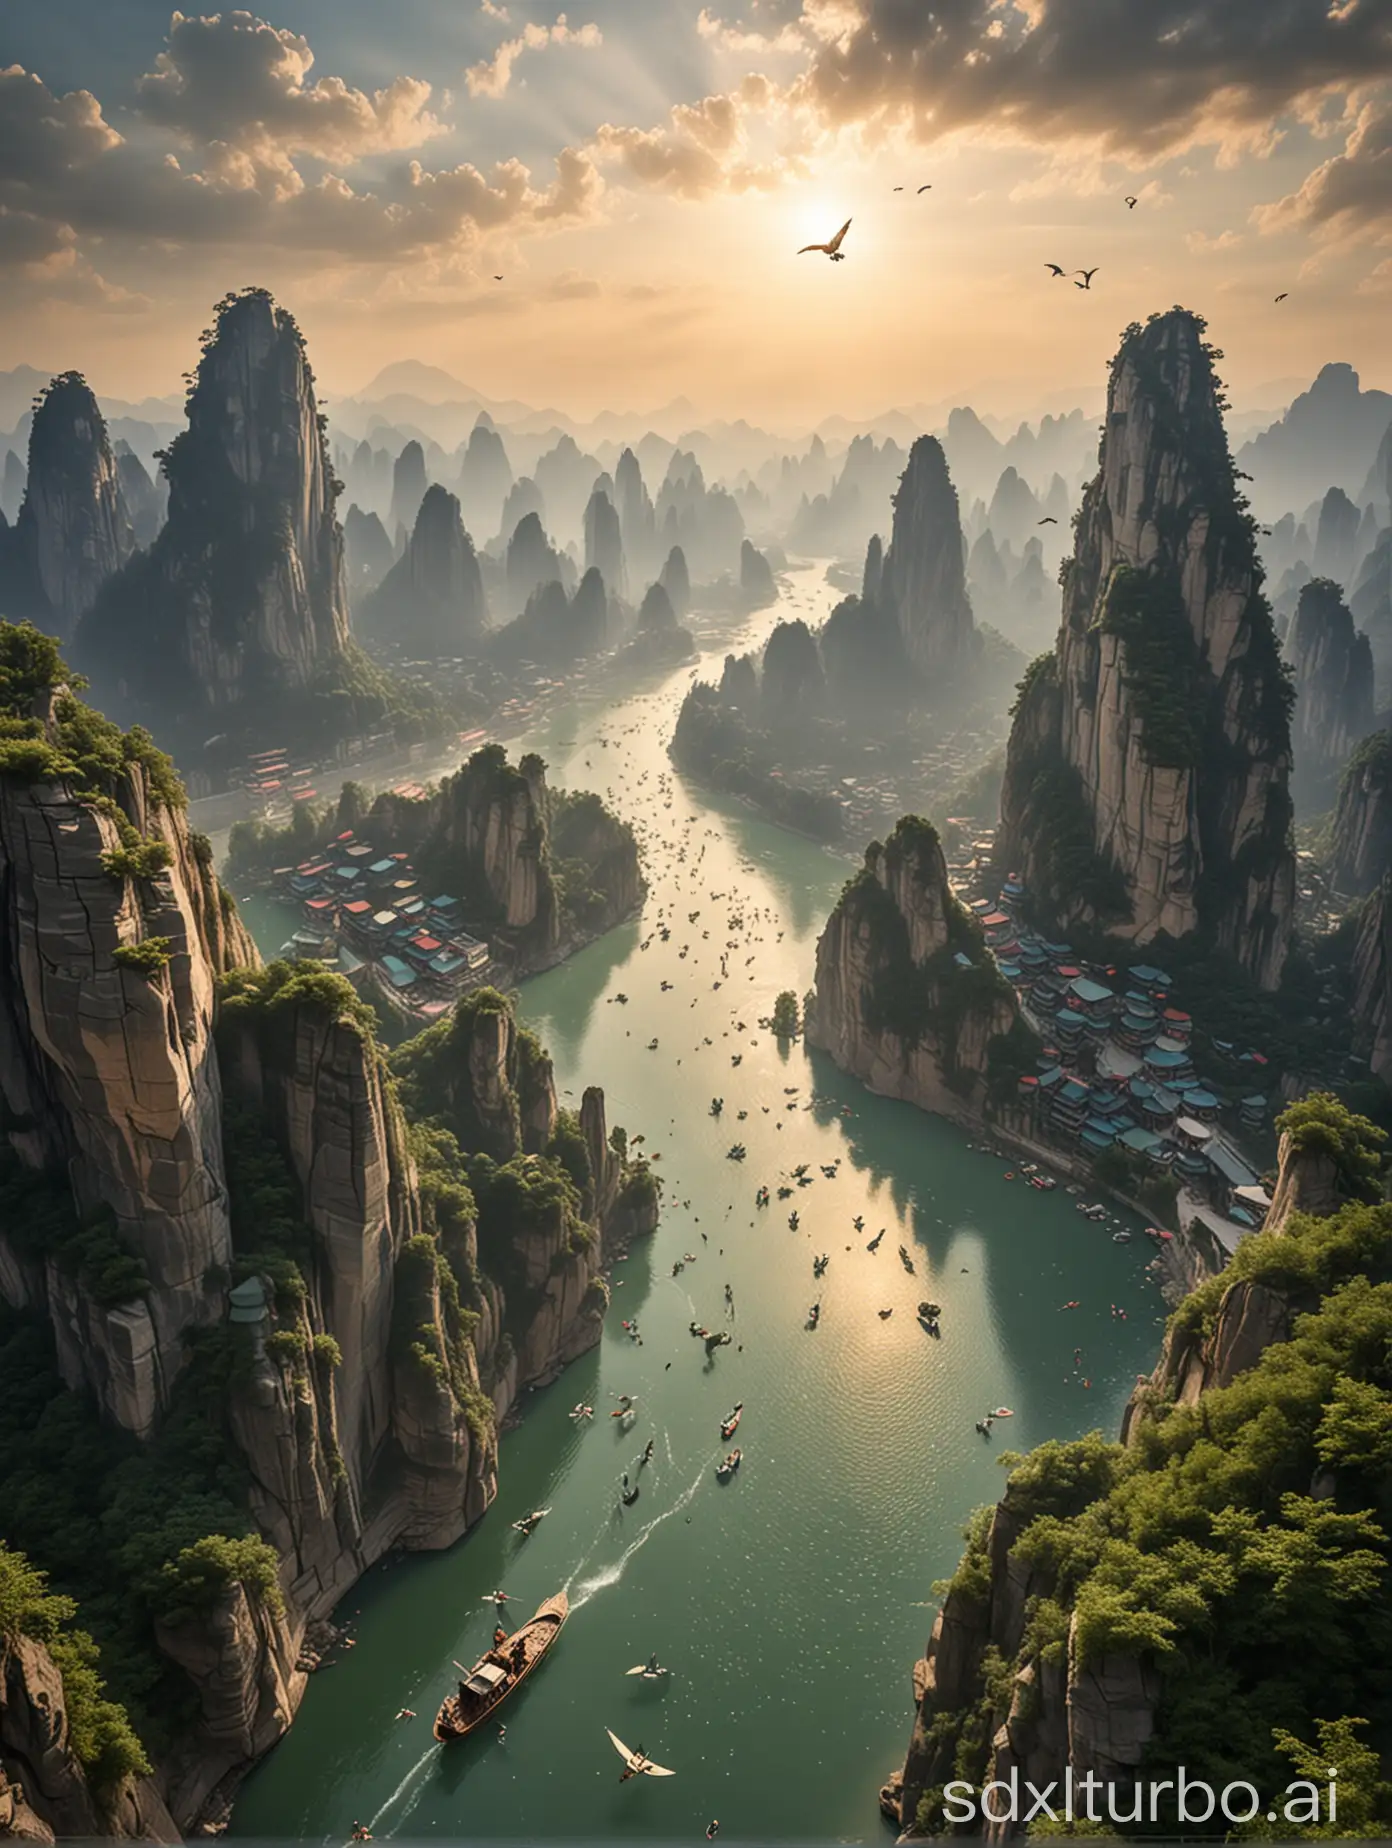 China's modern cities are full of fairy energy, with mountains and rivers, and people flying in the sky